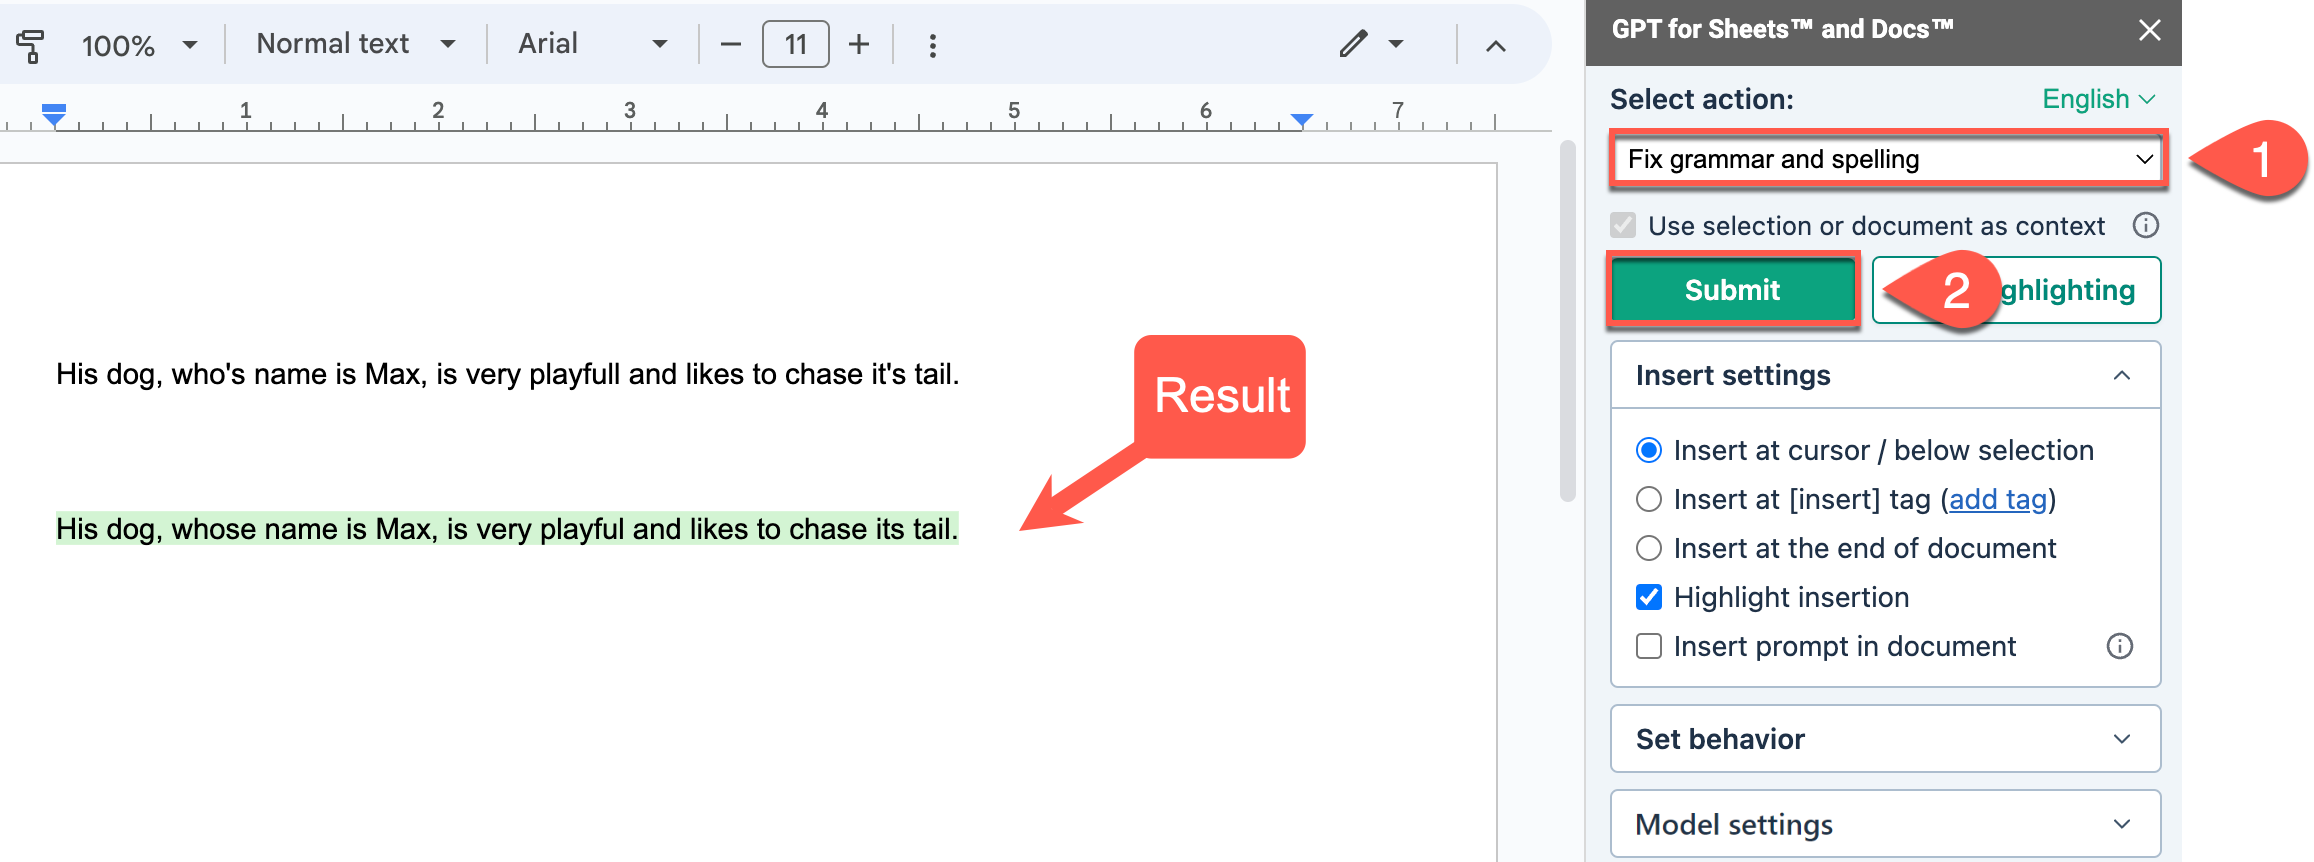 The response is rephrased without any grammar or spelling mistake in the Google document